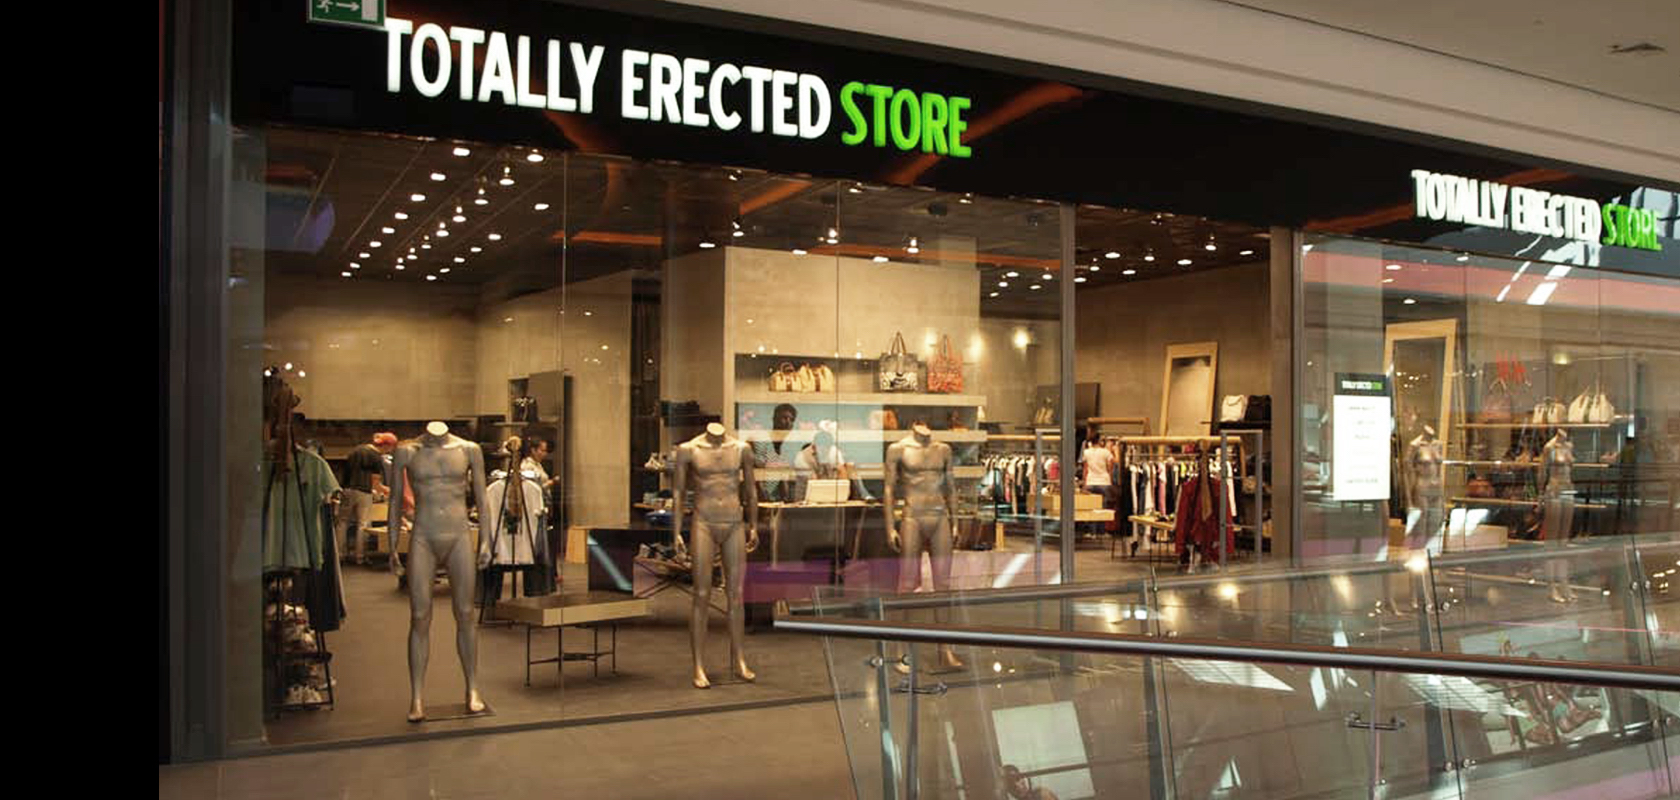 Totally Erected Store | Altronics Light